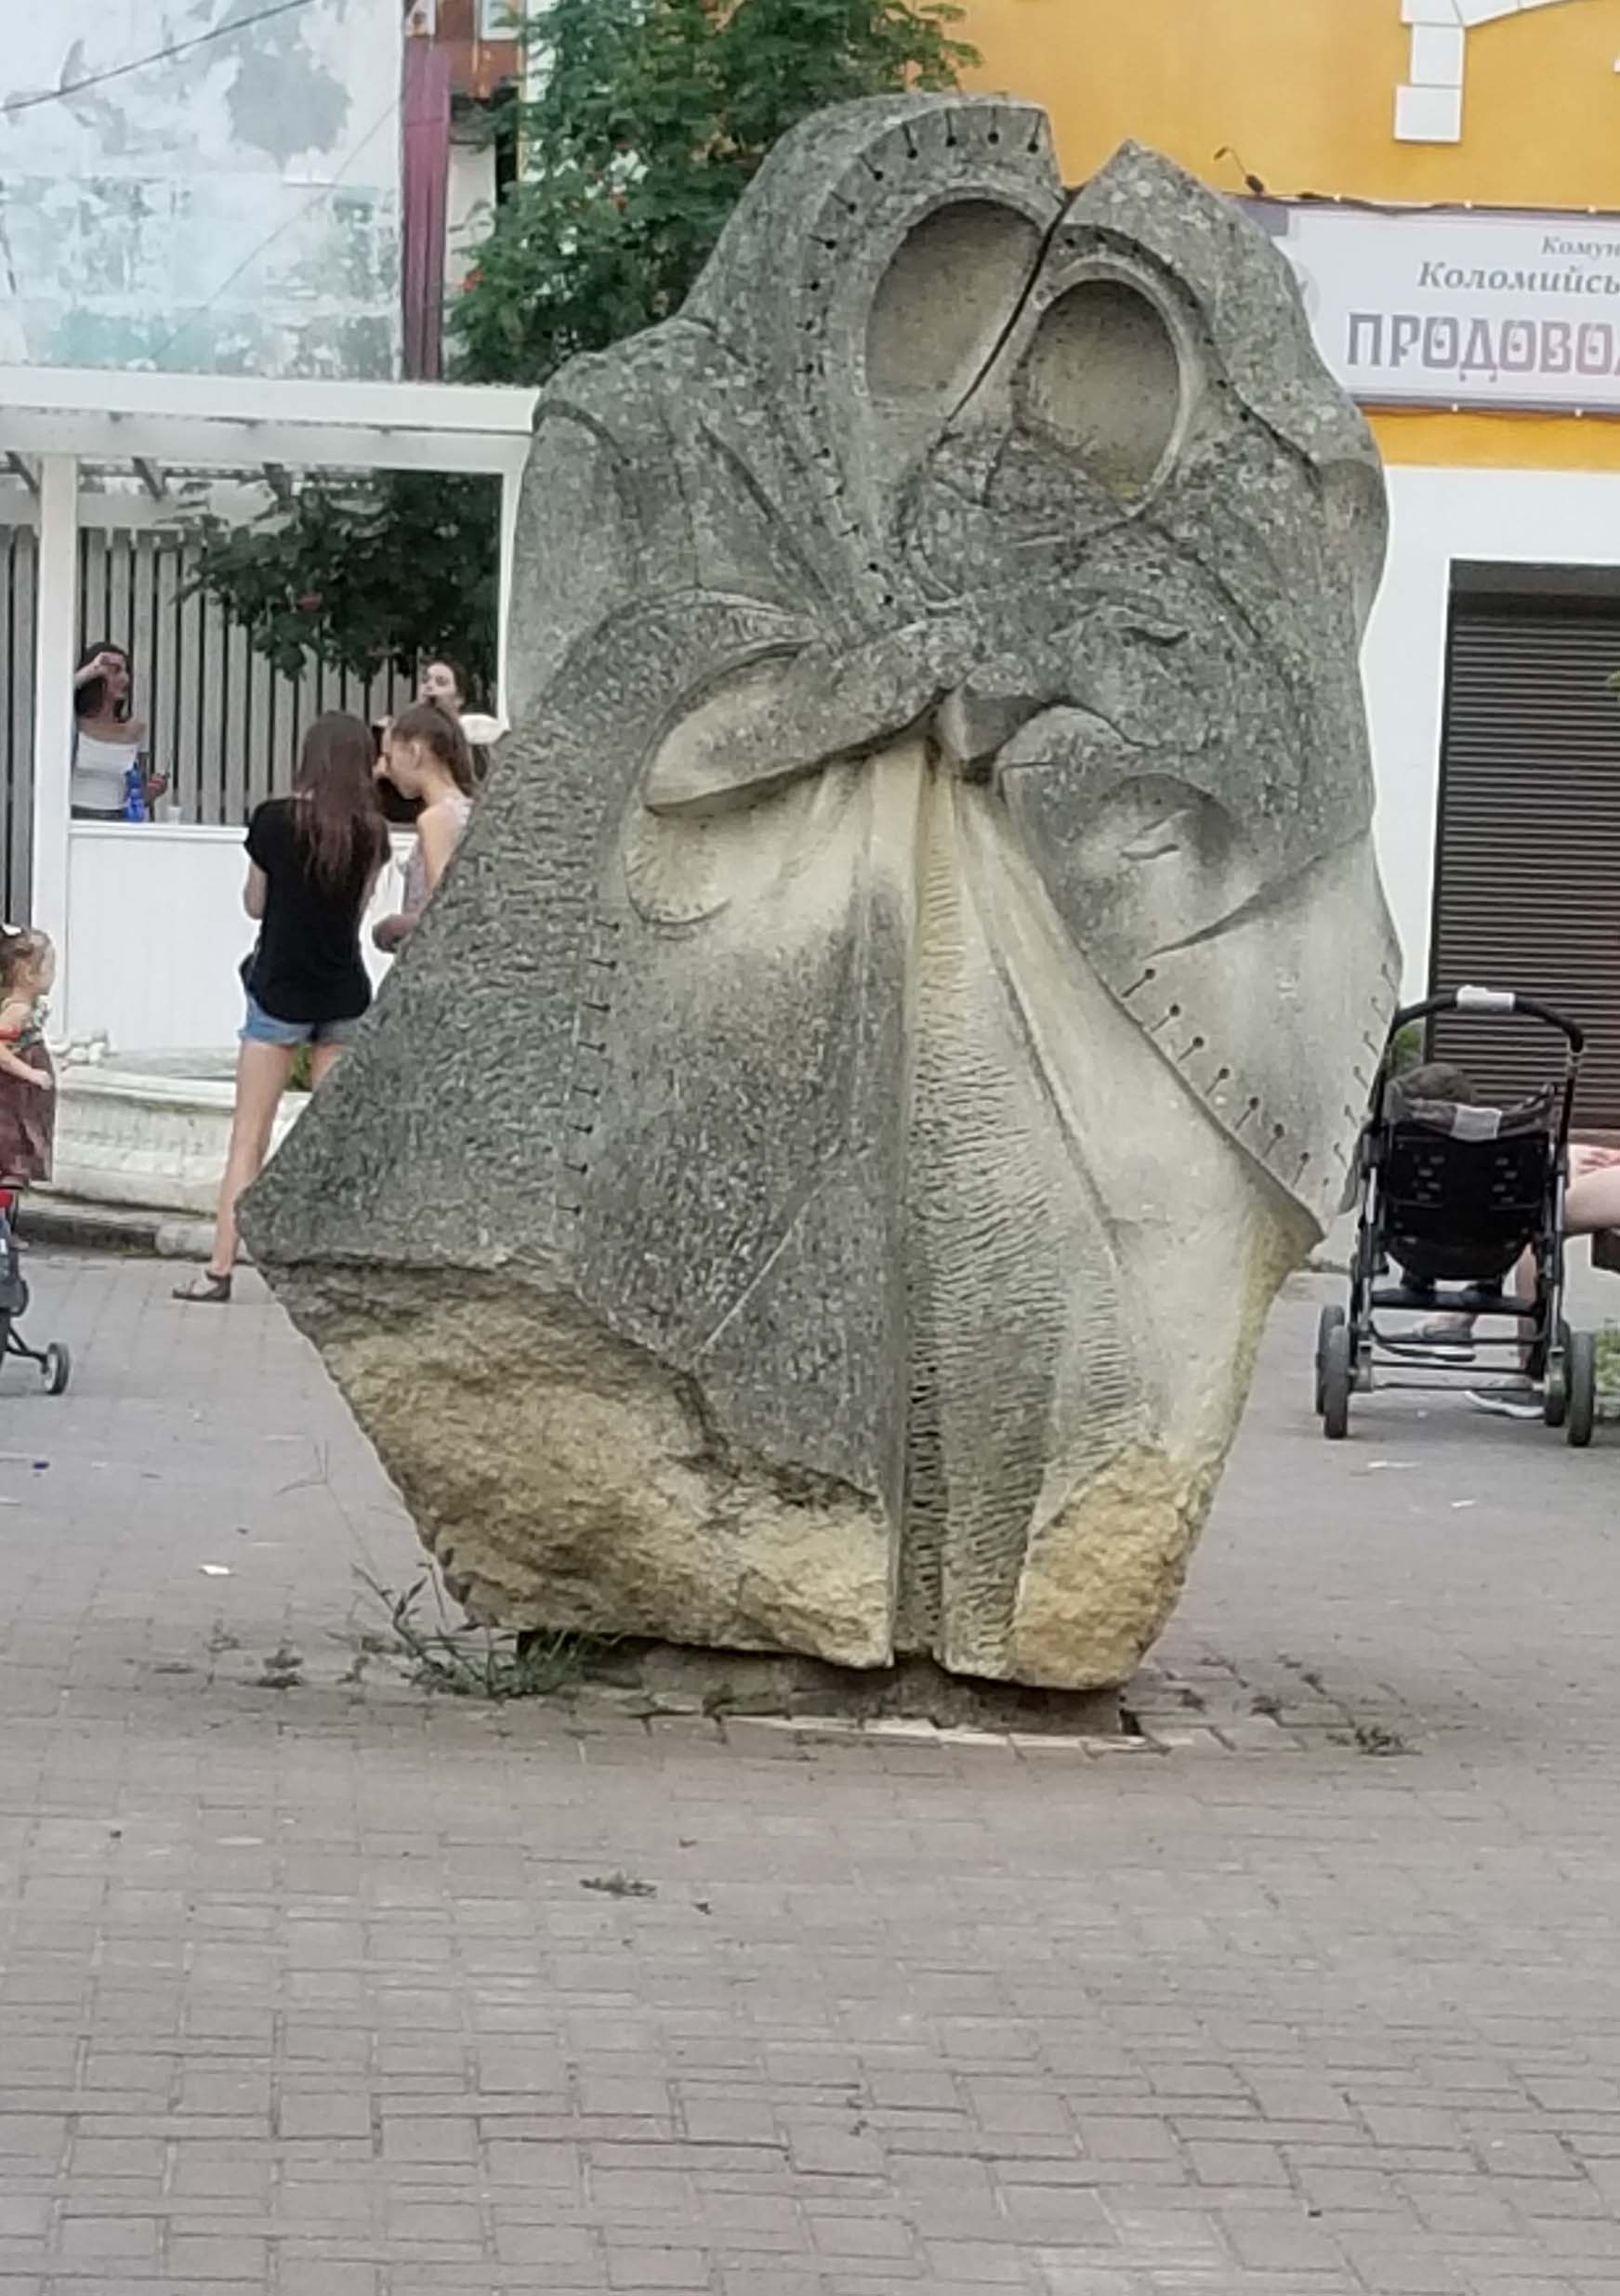 Statue of 2 women holding a baby